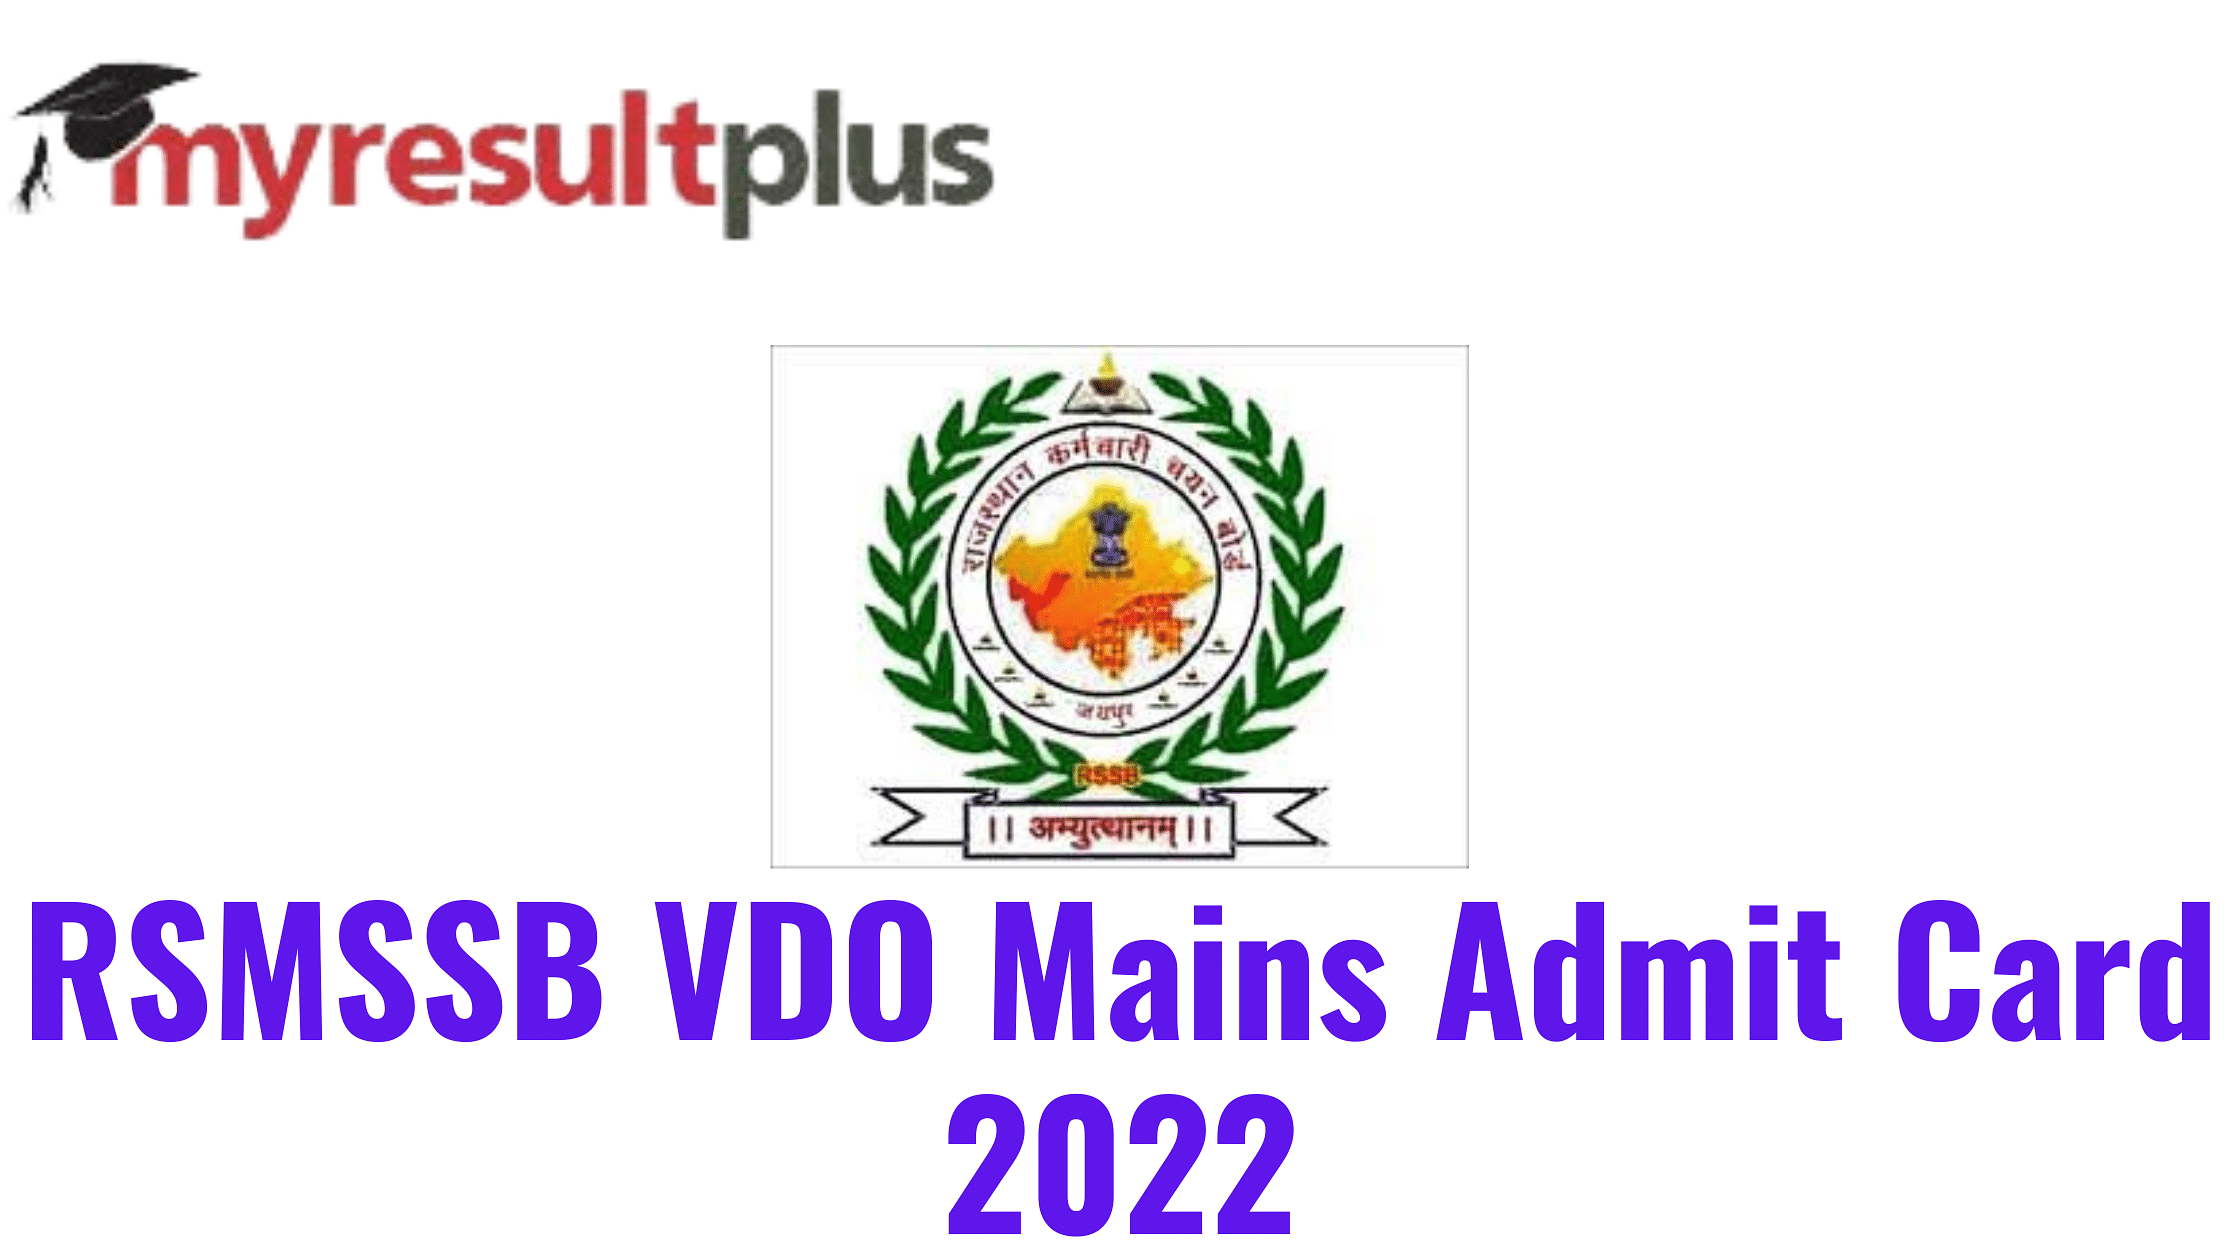 RSMSSB VDO Admit Card 2022 Released For Mains Exam, Download Through Direct Link Here